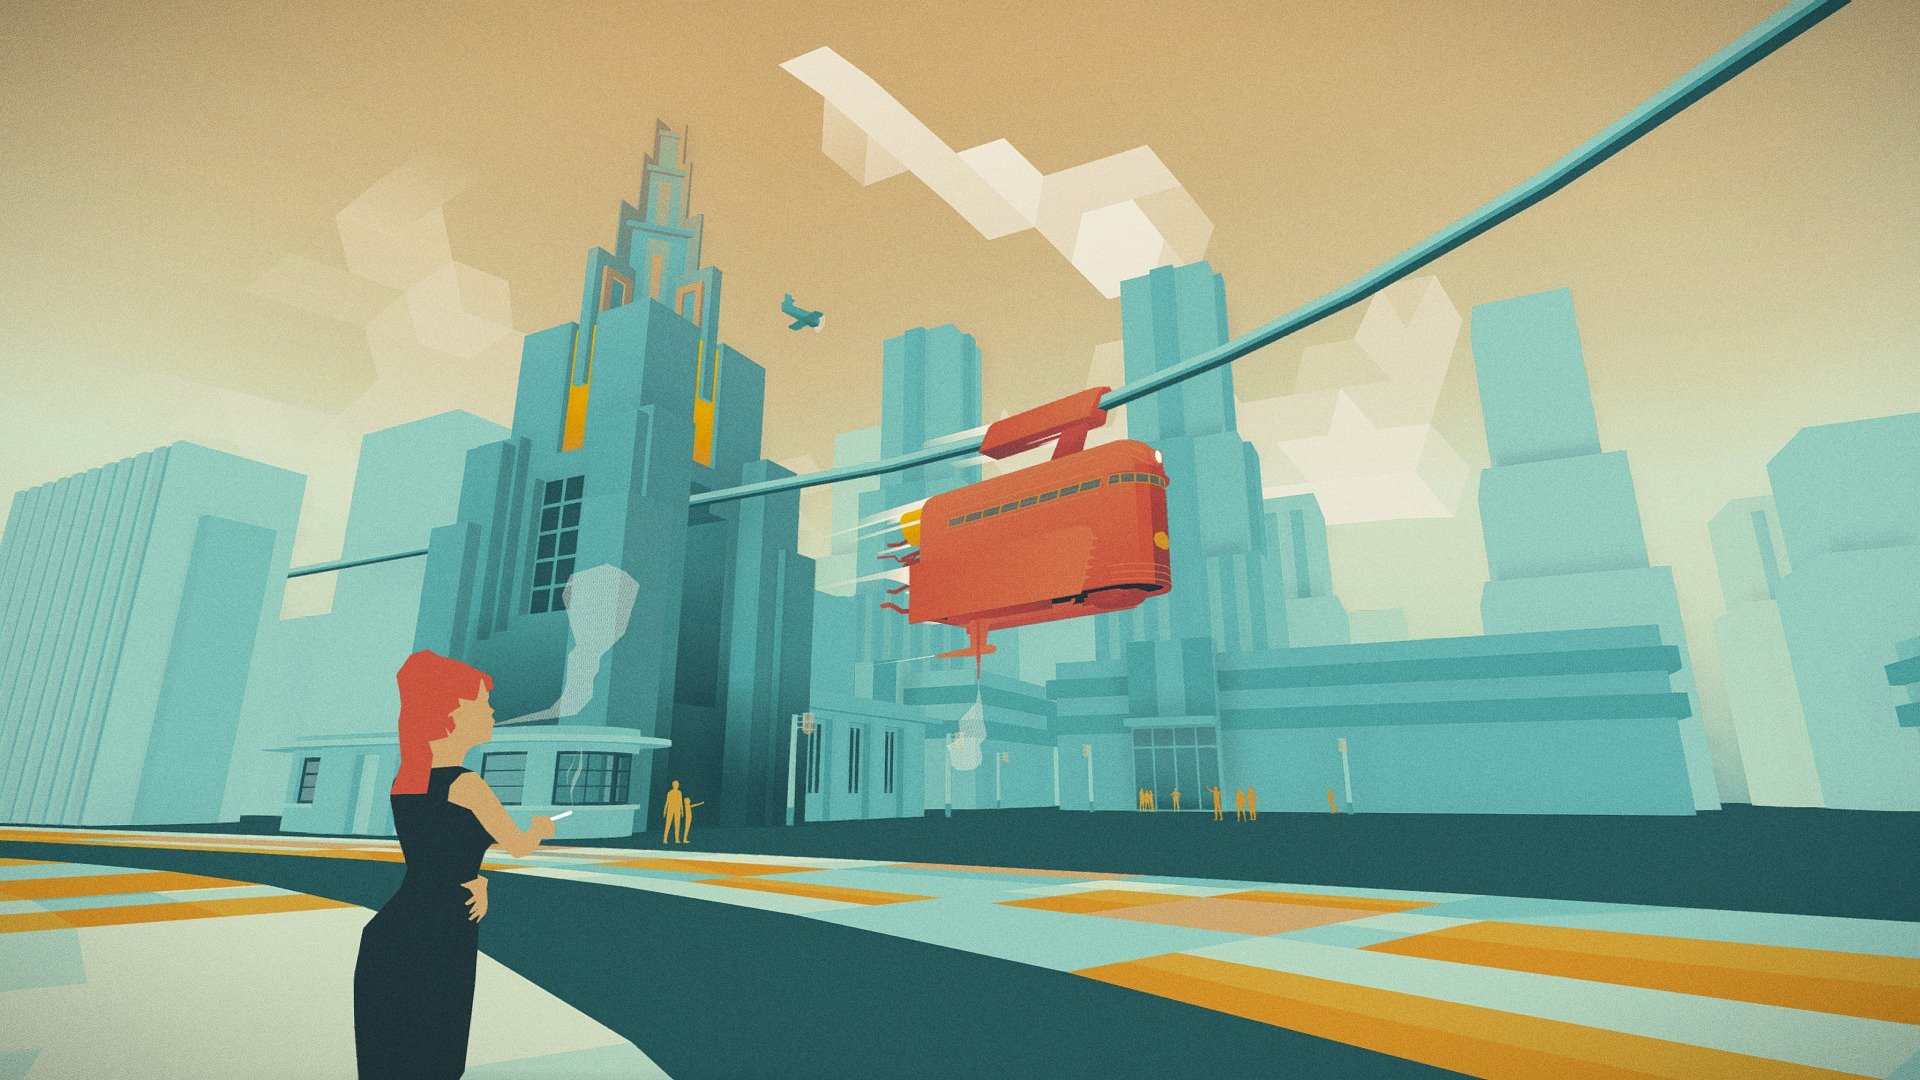 A city landscape in the style of art deco poster. 
My entry for the Sketchfab Challenge: Low Poly Dieselpunk

You can find a wallpaper (render with sketchfab screenshot) here :

 - mOnorail - 3D model by boriscargo 3d model